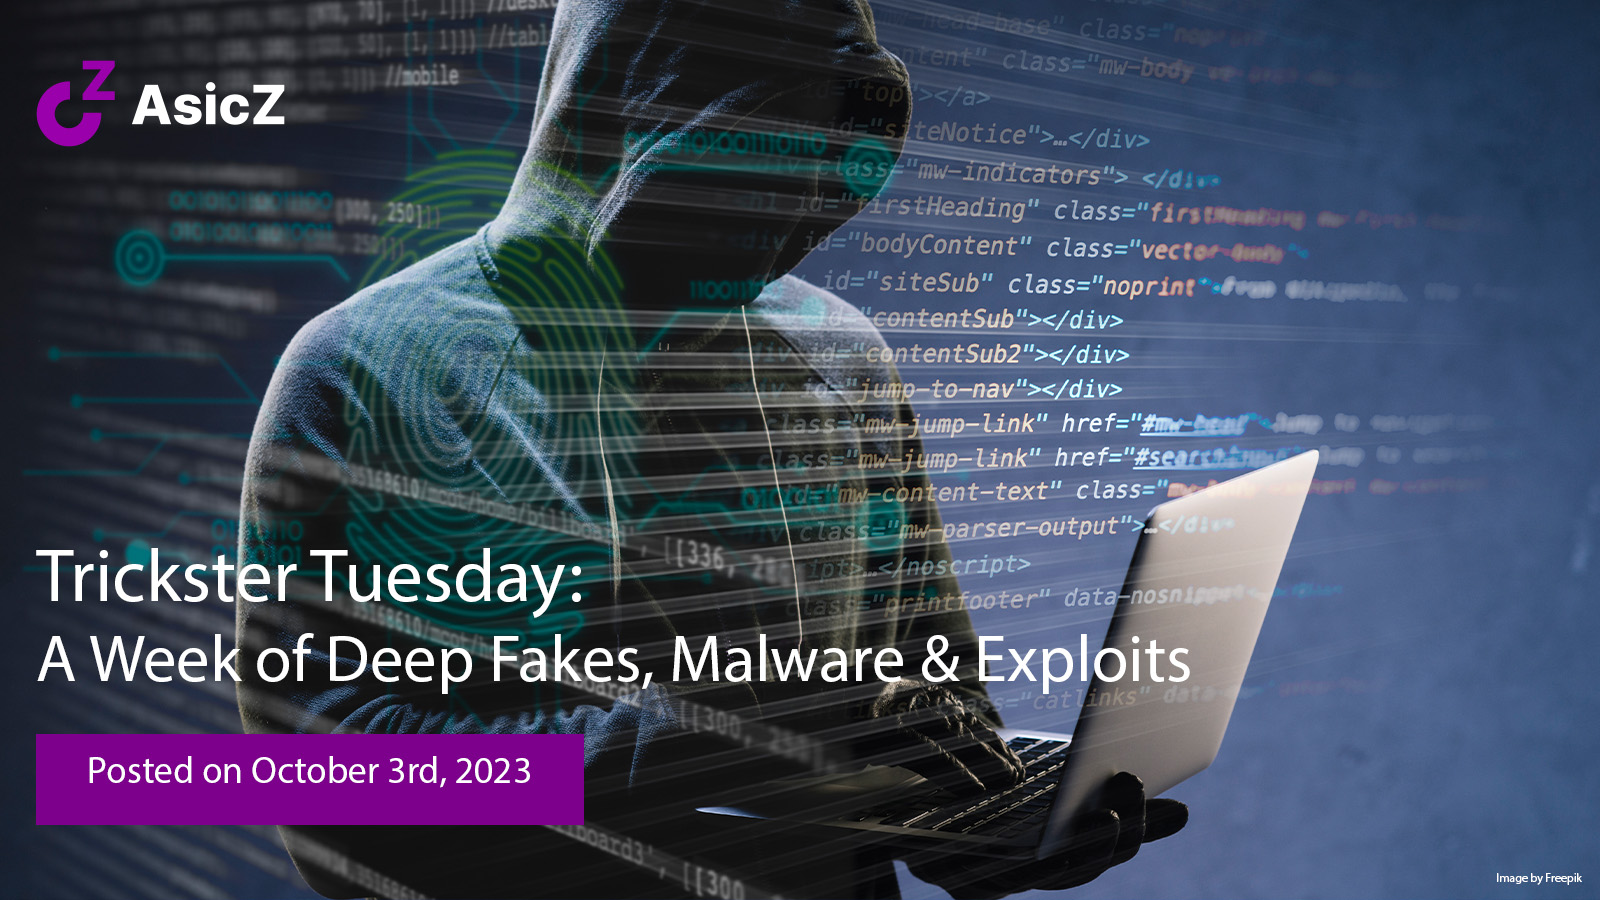 Trickster Tuesday: A Week of Deep Fakes, Malware and Exploits